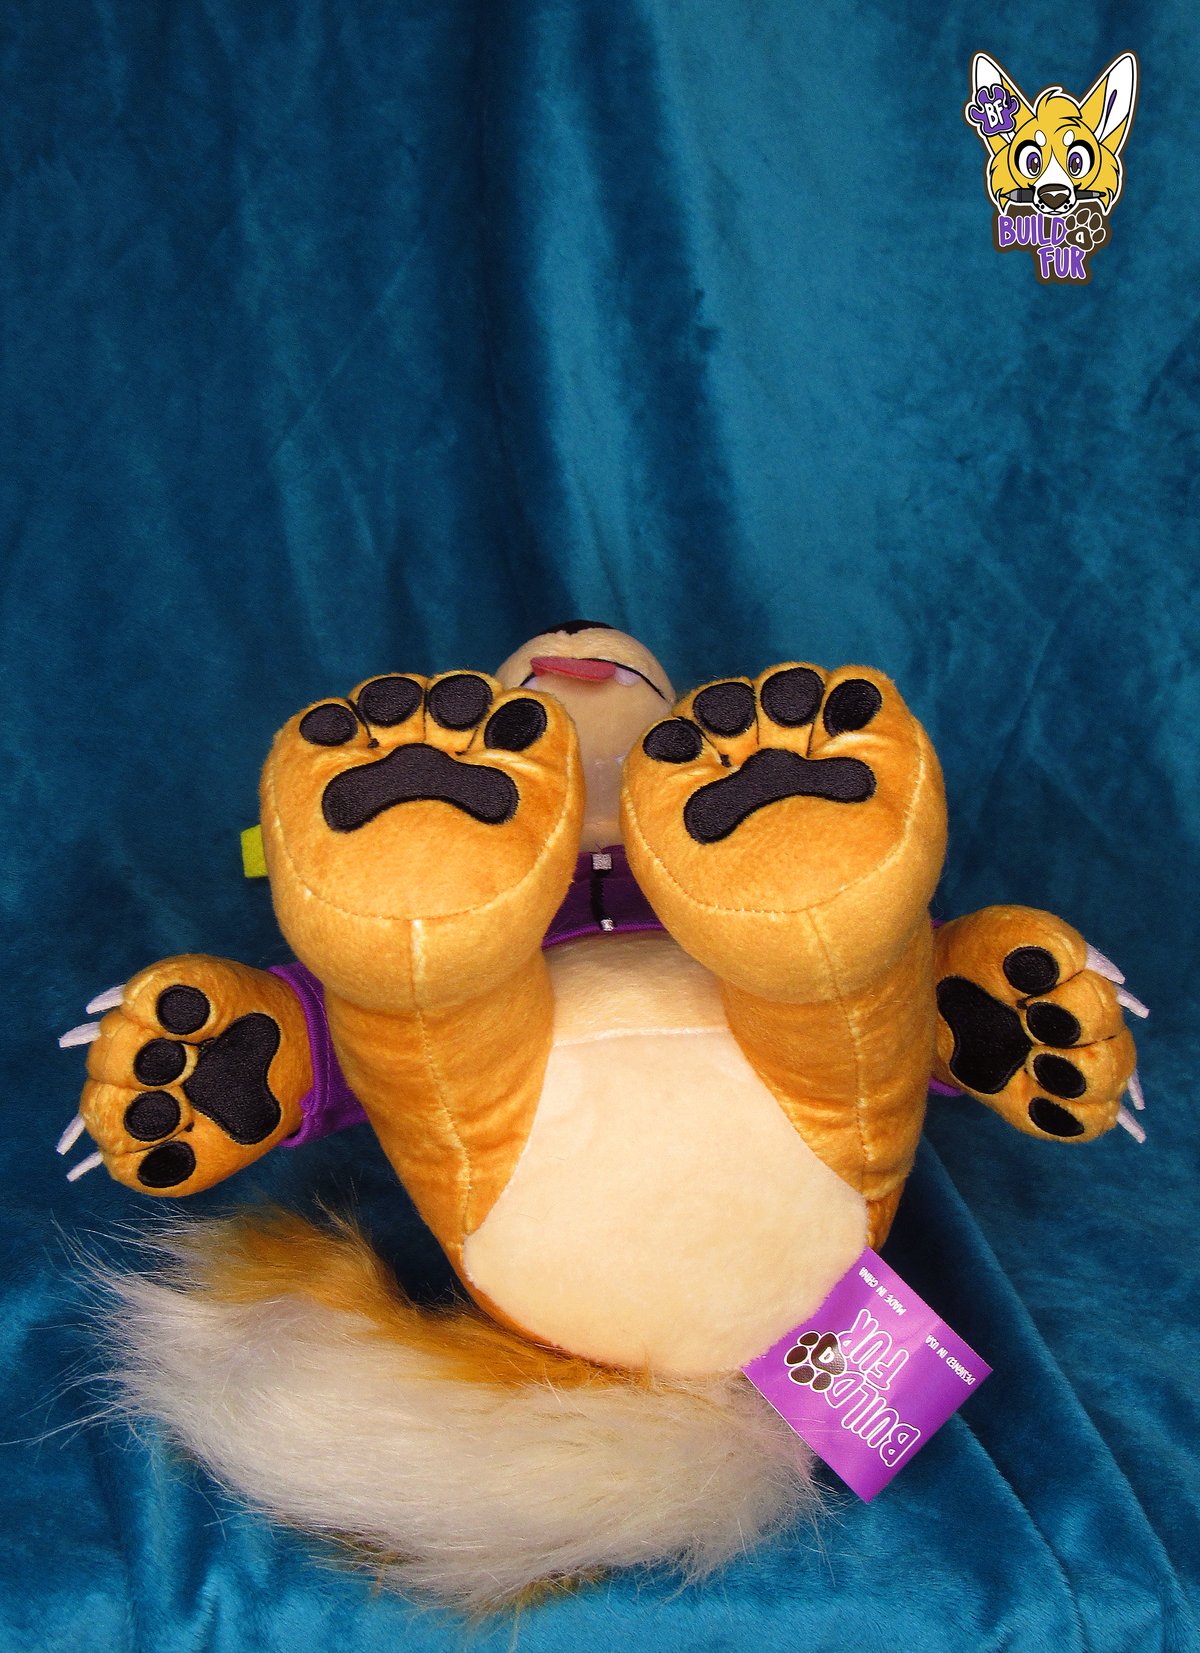 Image of Whiskey Dingo Plush Collectible Preorder ROUND 2 (FUNDED)